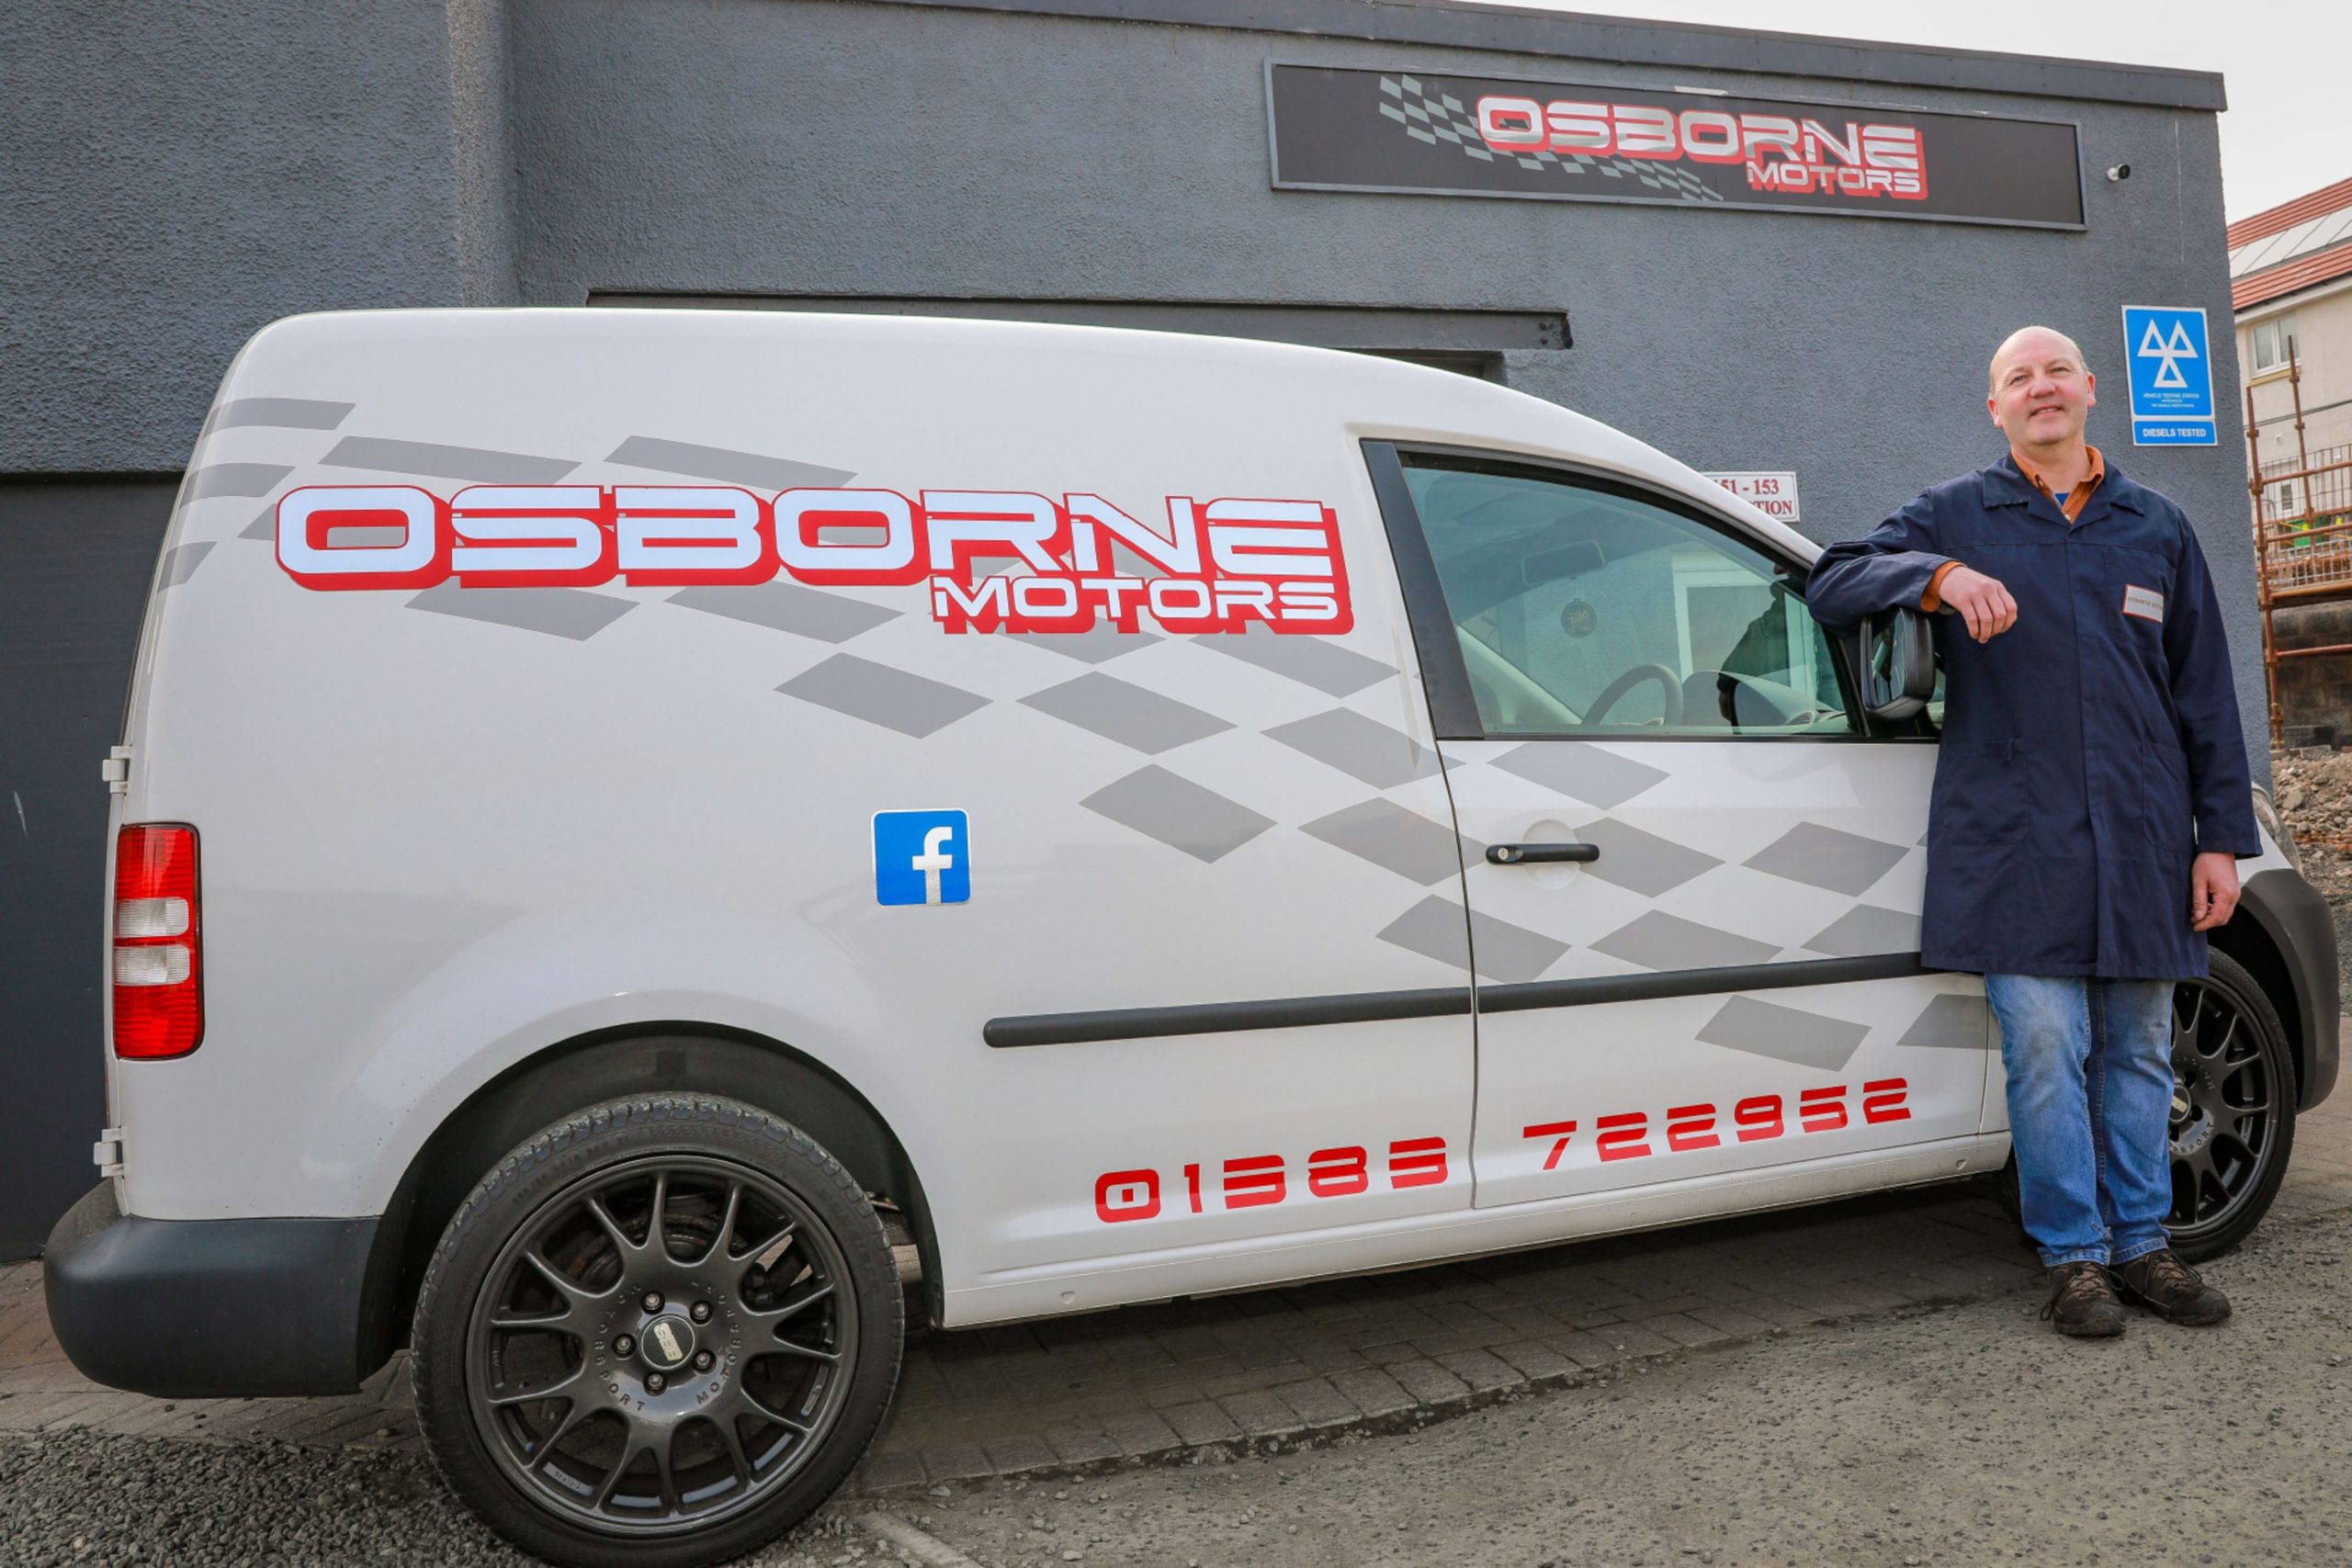 Michael Osborne (Owner) of Osborne Motors after replacing the tyres of a stranded NHS Nurse when her's had been slashed at her home in Dunfermline - Friday 10th April 2020 - Steve Brown / DCT Media